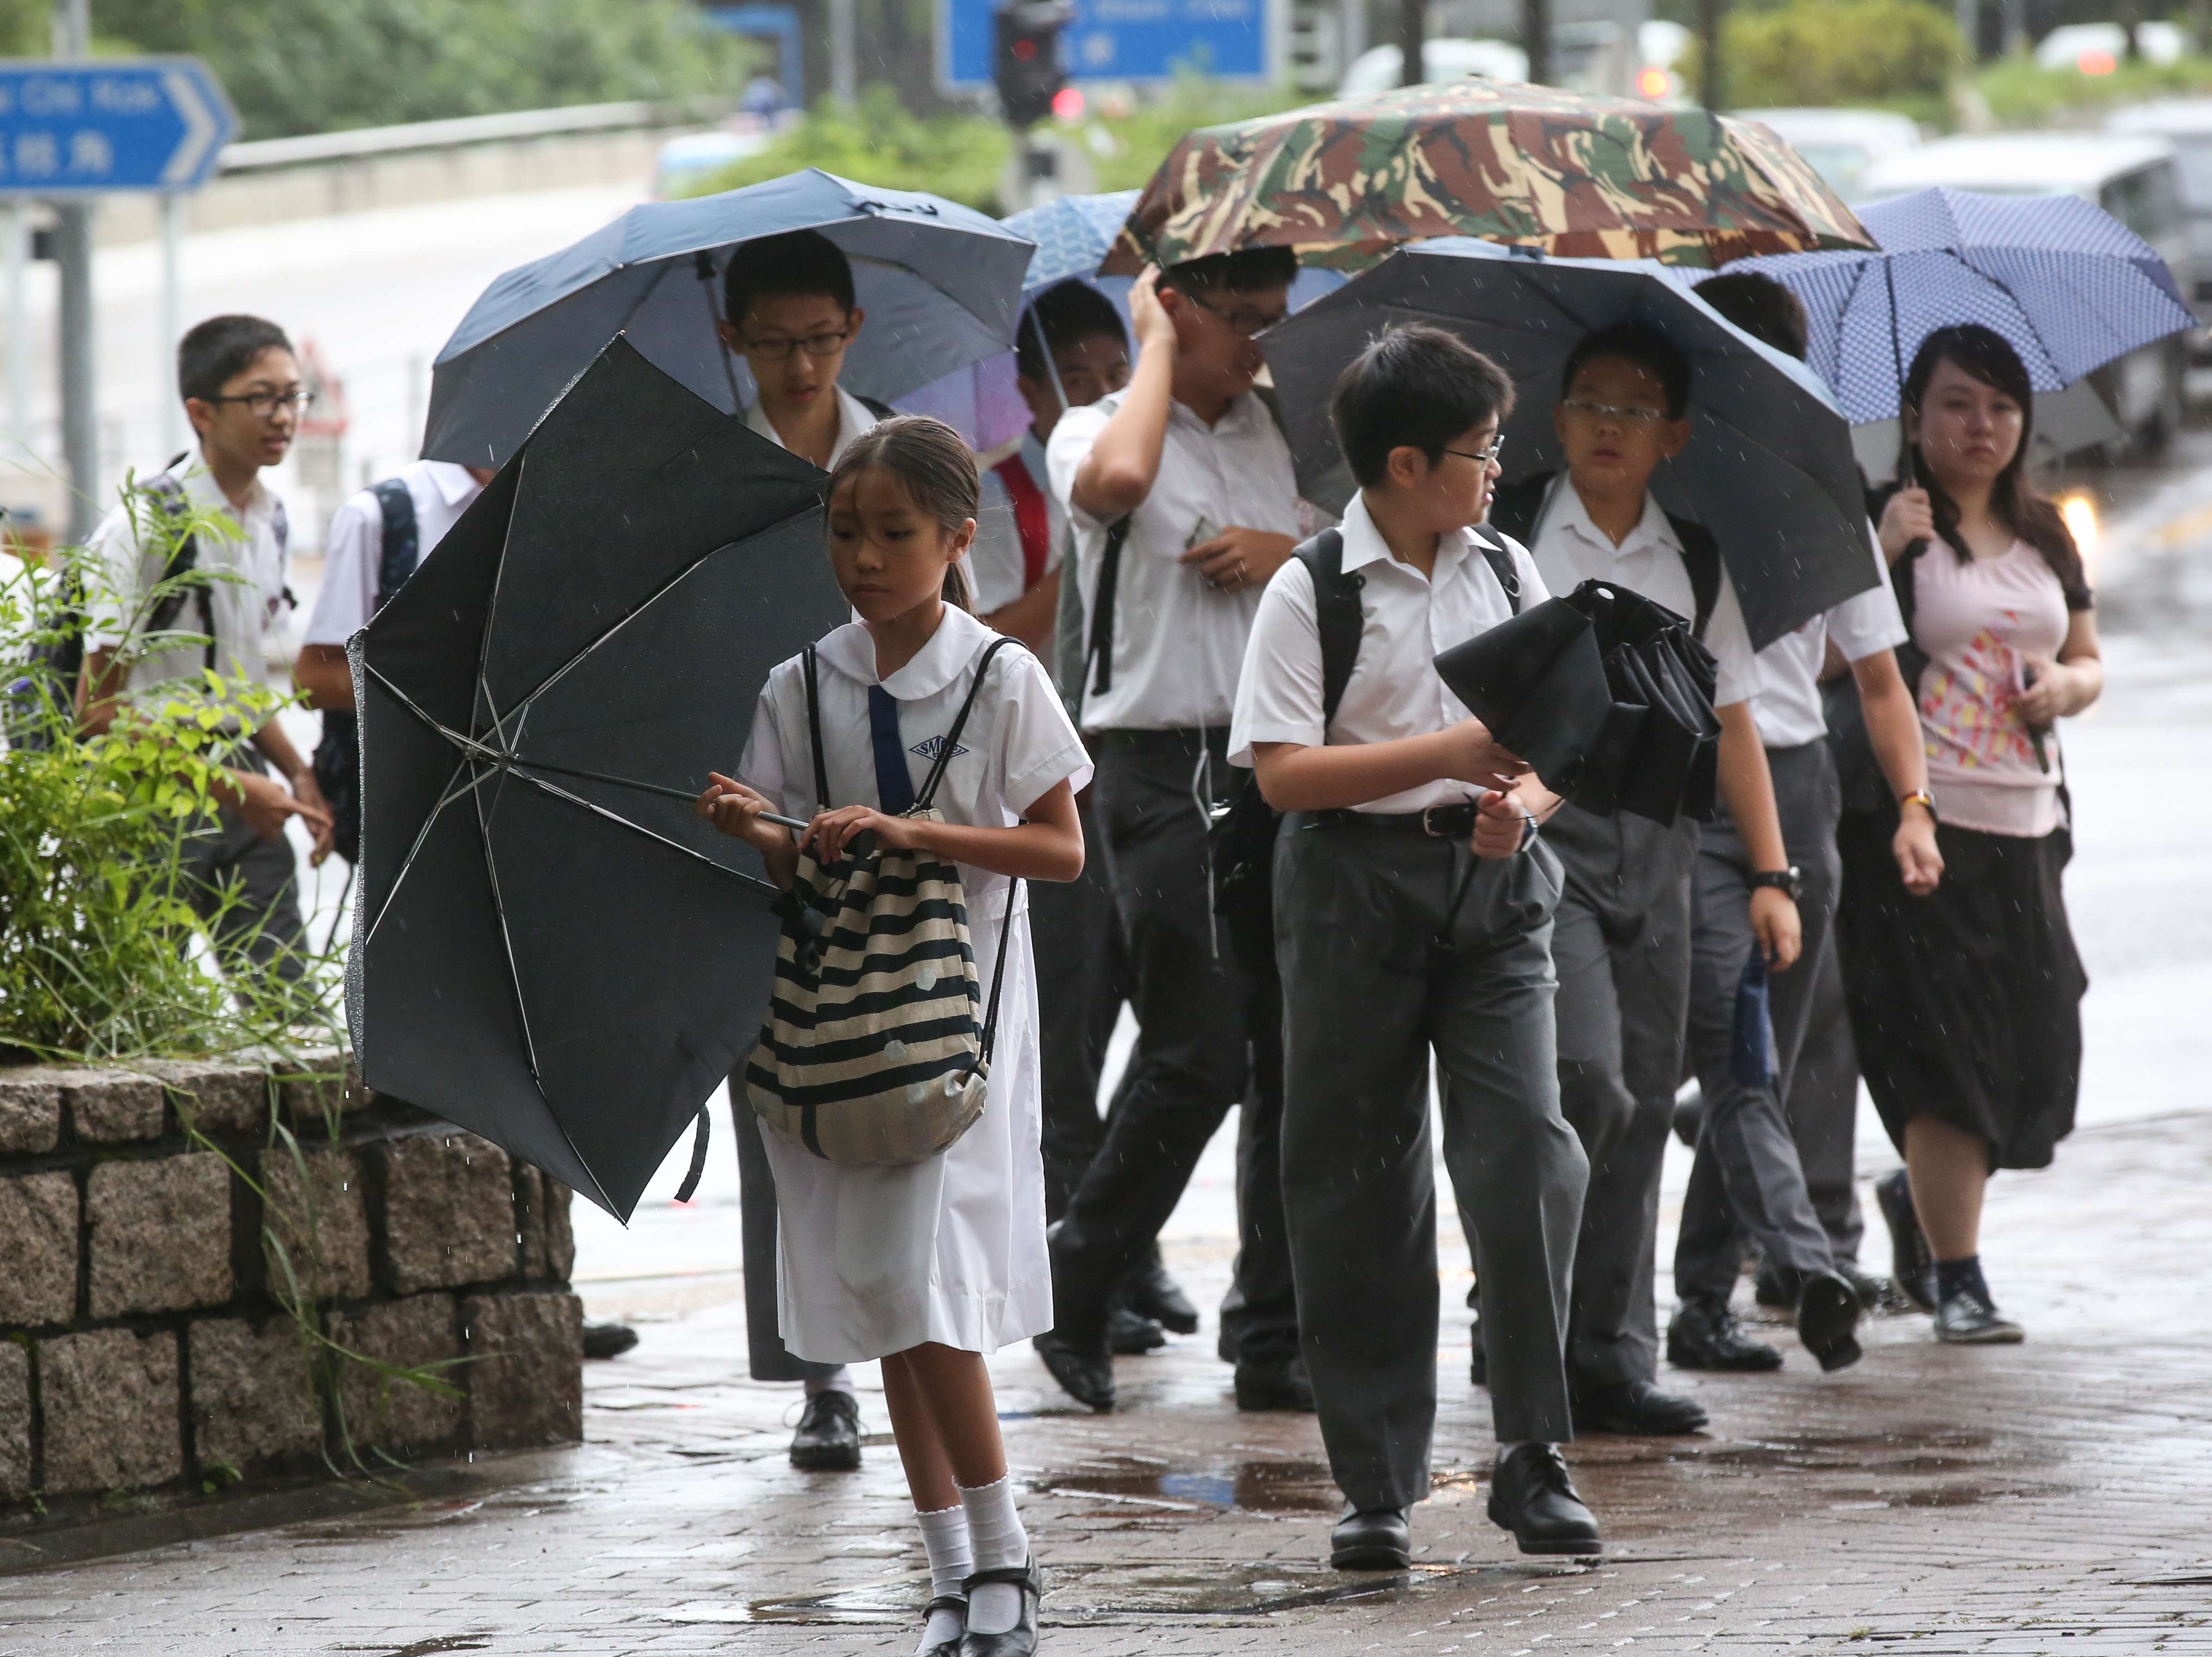 Students in Sham Shui Po make their way to school on the first day of a new term this year. Photo: Edward Wong